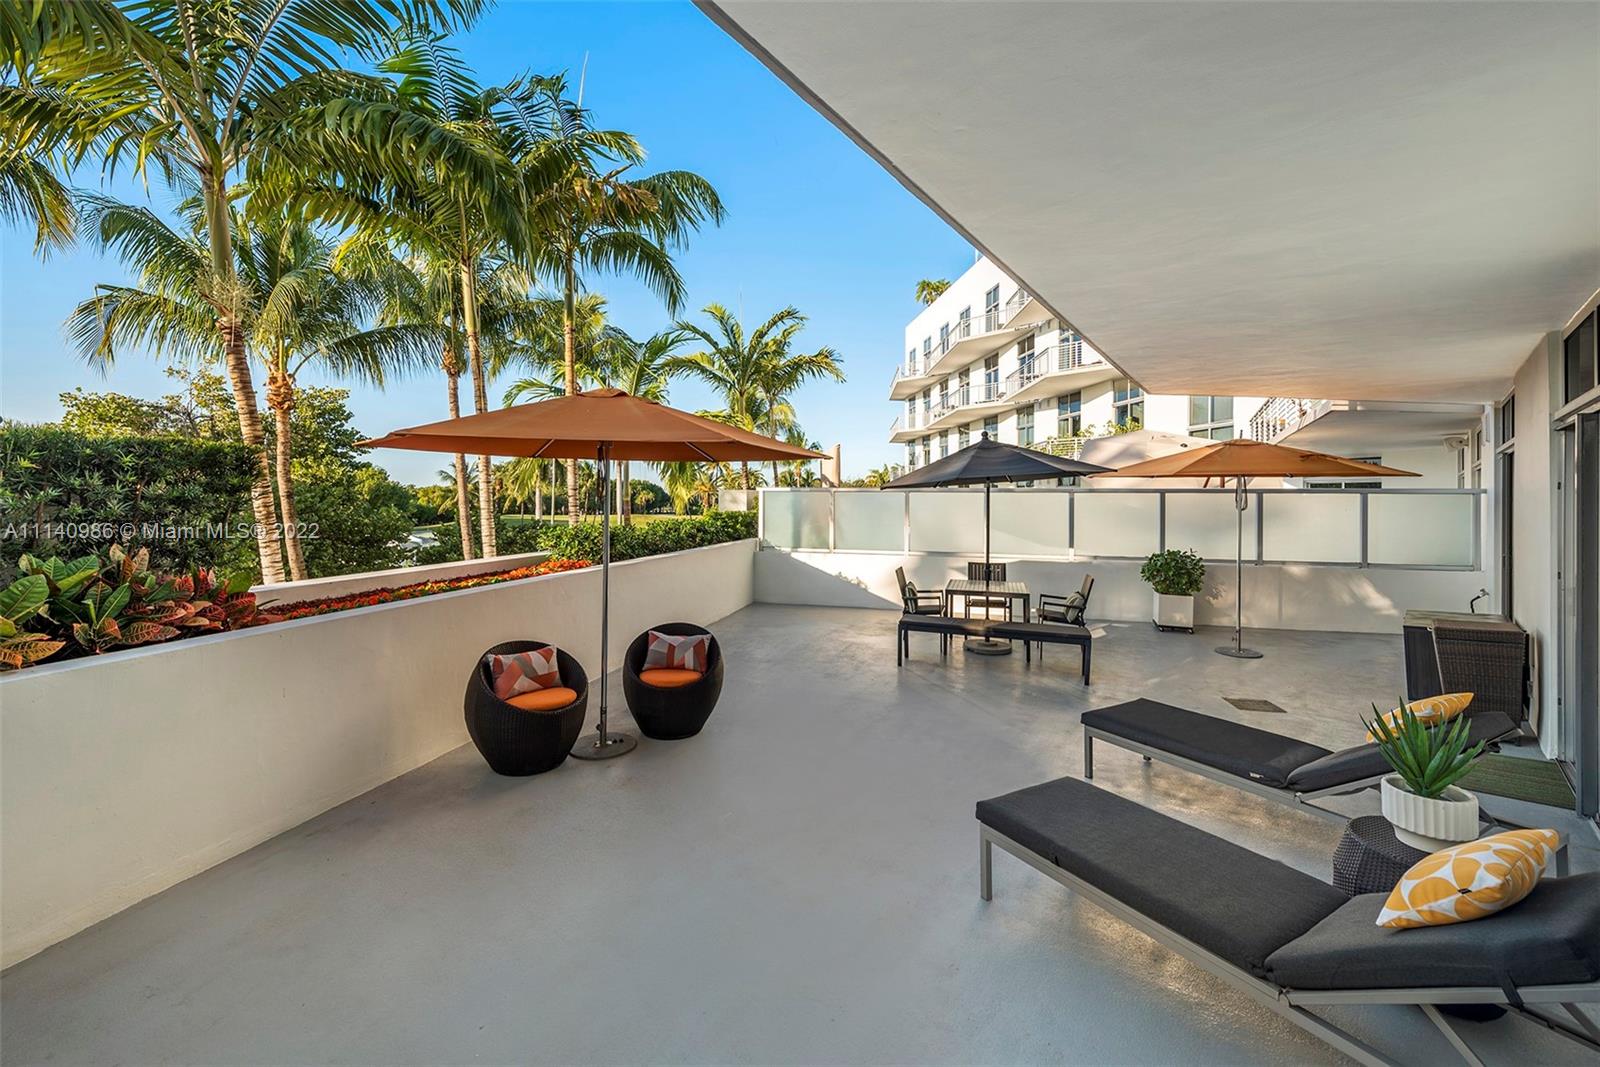 Listing Image 2001 Meridian Ave #305